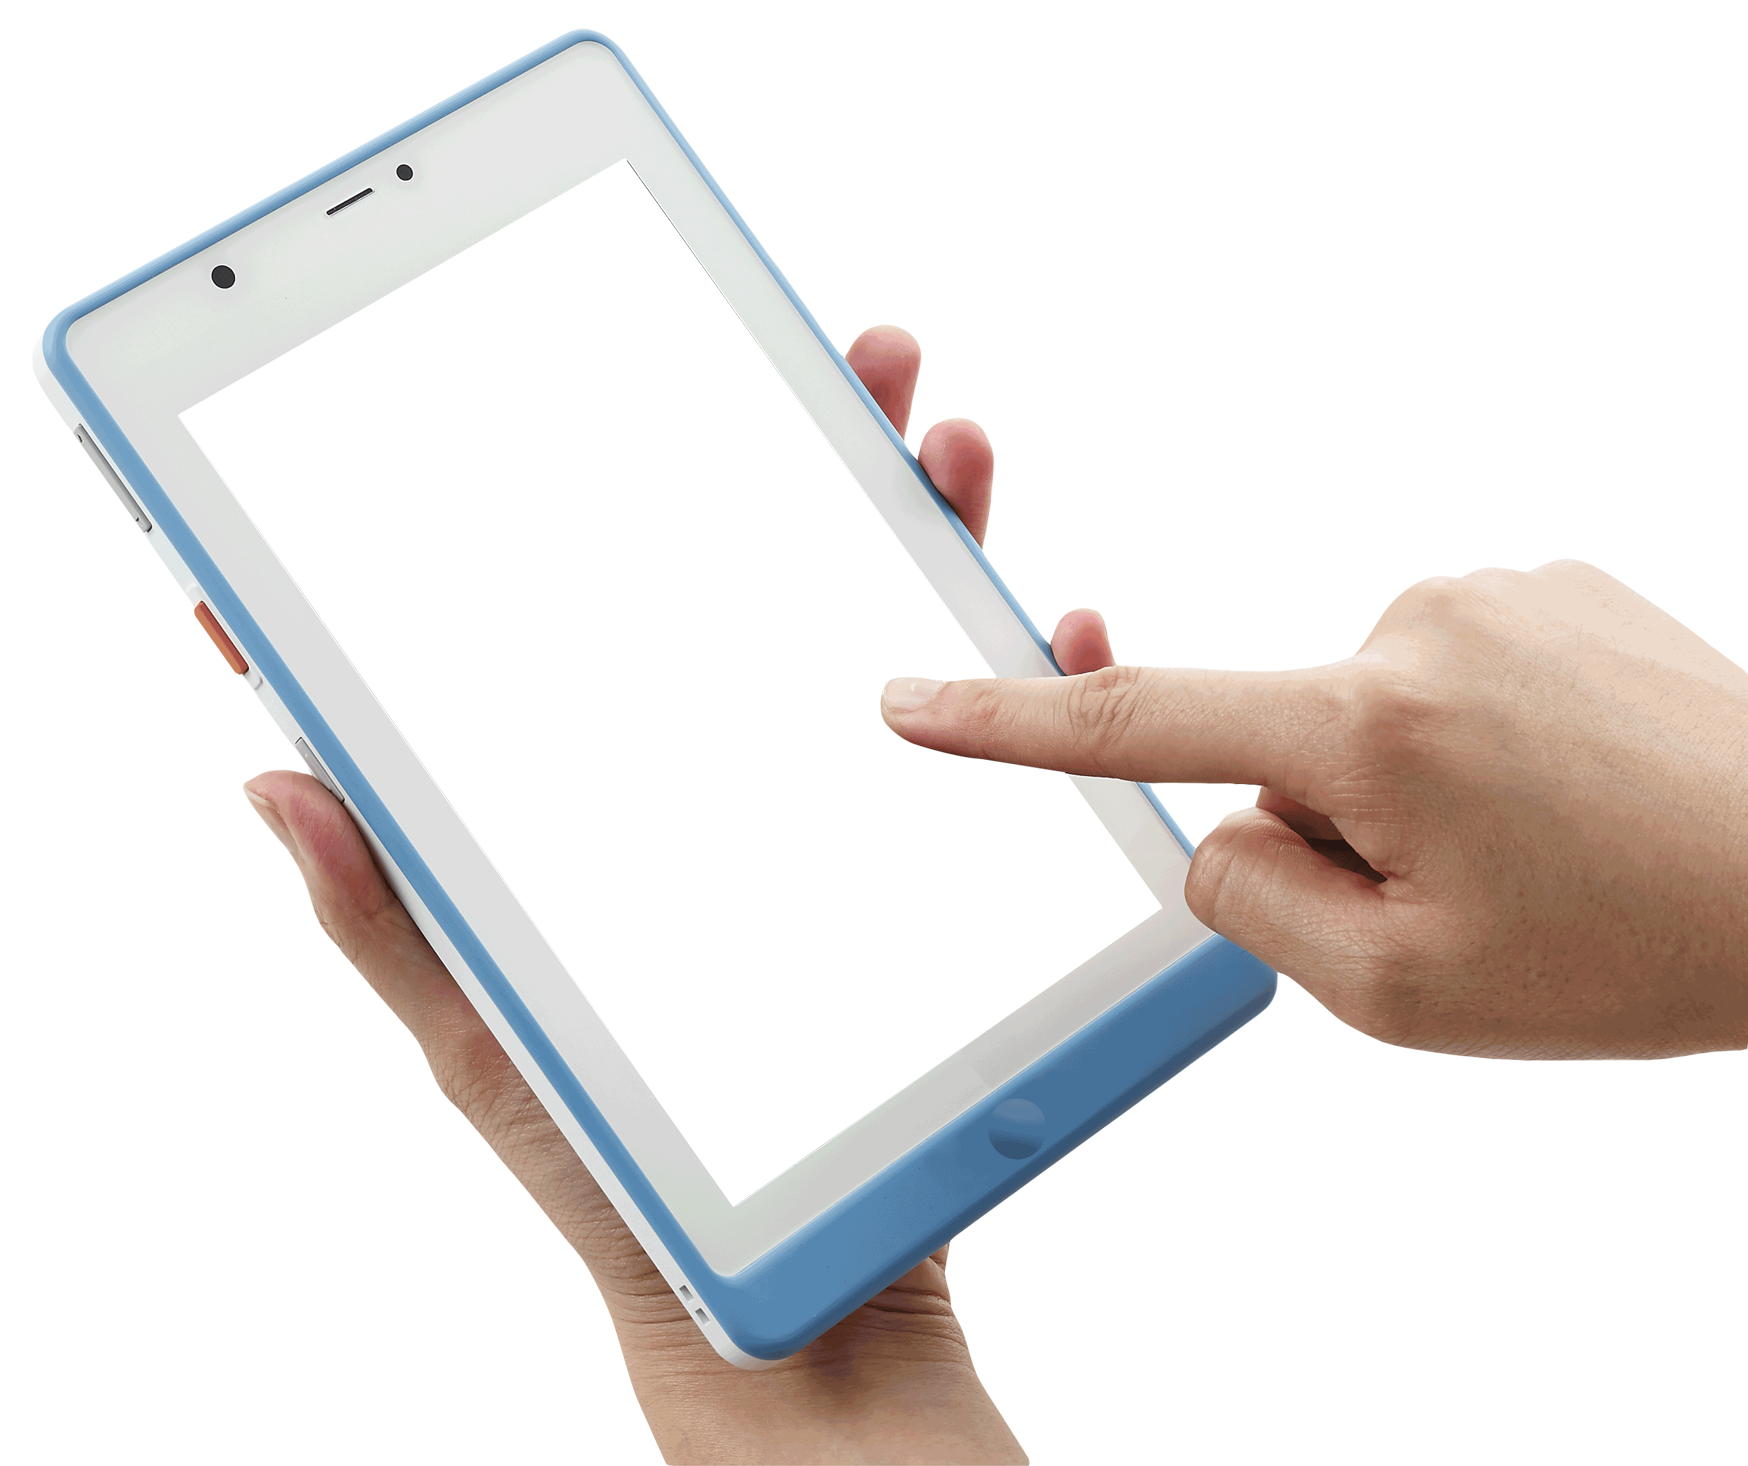 Finger touch png image. Ipad clipart tablet clipart